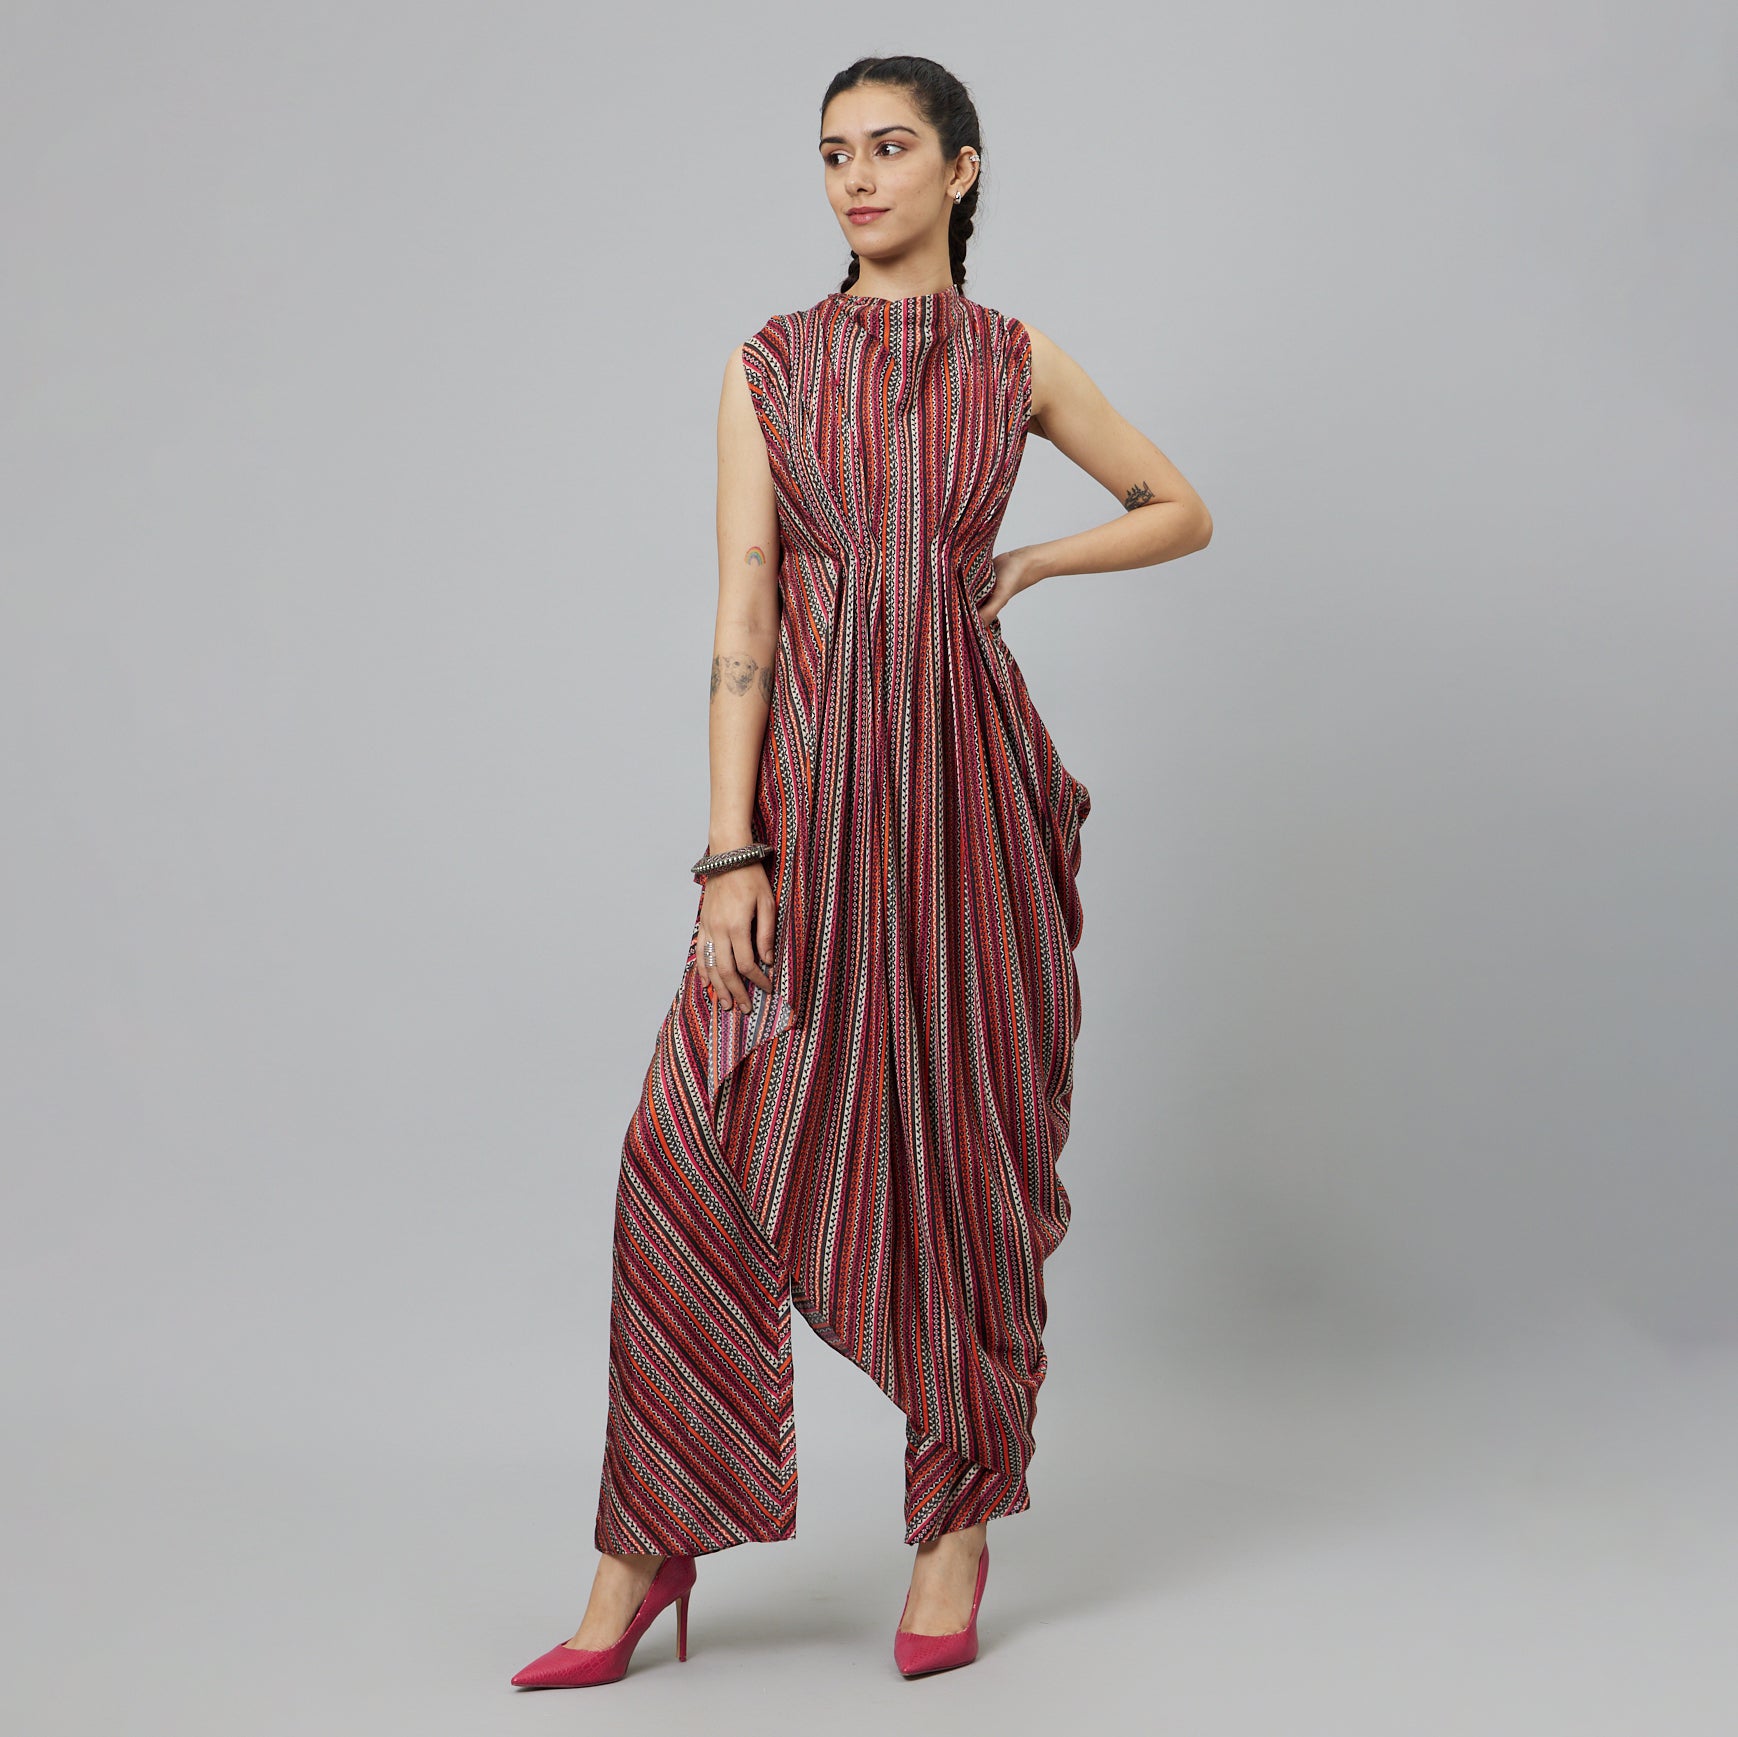 BOHEMIAN STRIPE PRINT CROP TOP WITH ATTACHED DRAPE WITH PANTS